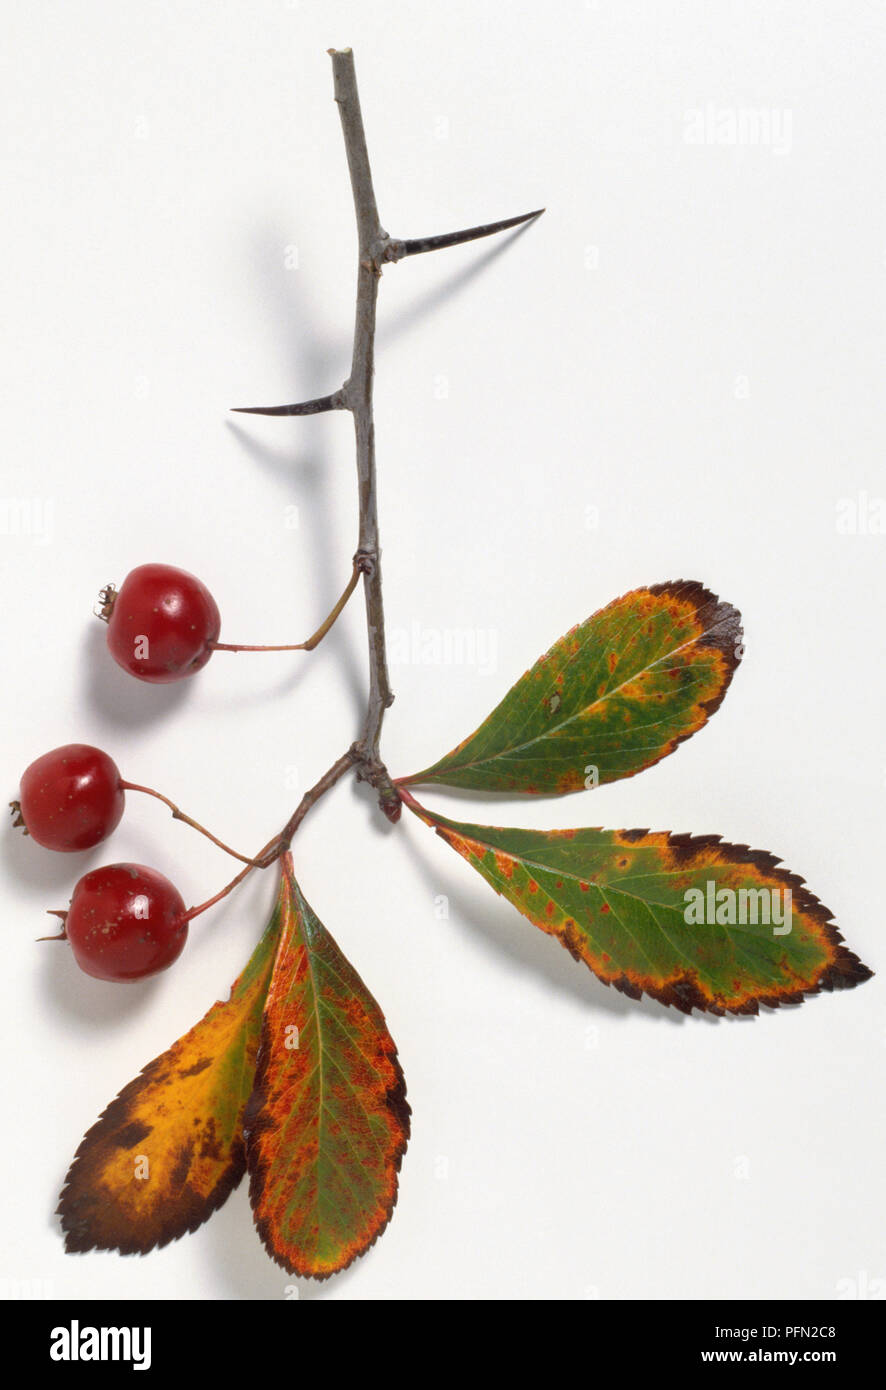 Rosaceae, Crataegus crus-galli, Cockspur Thorn, thorny branch tip with autumnal leaves changing colour, and rounded, fleshy red fruits. Stock Photo